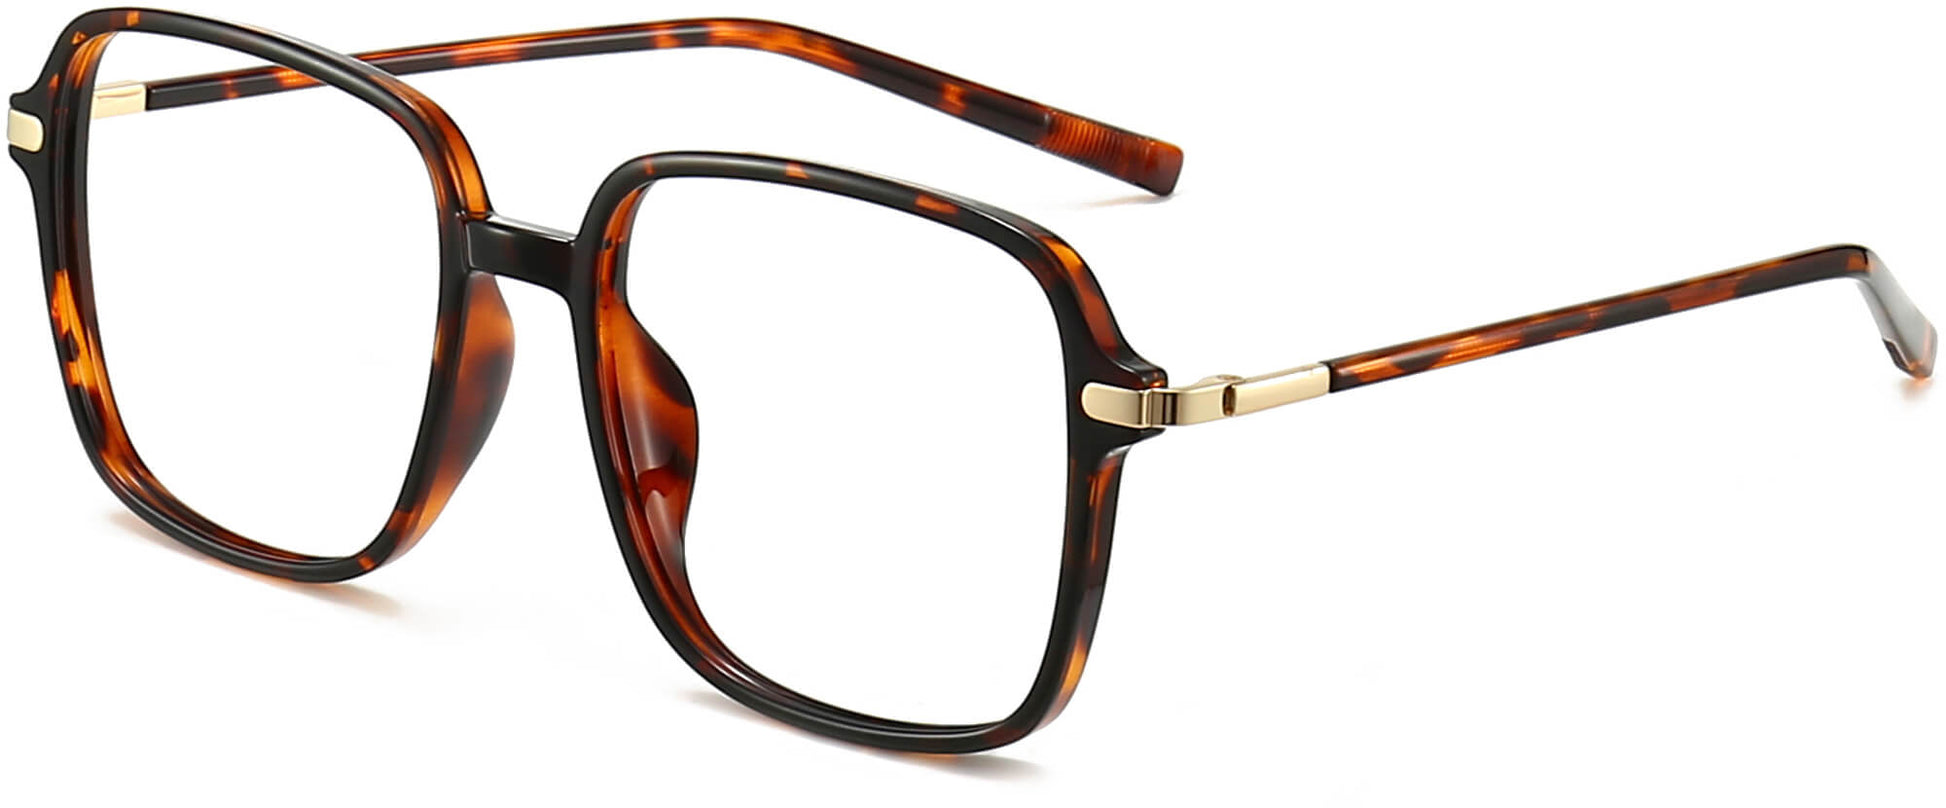 Elodie Square Tortoise Eyeglasses from ANRRI, angle view